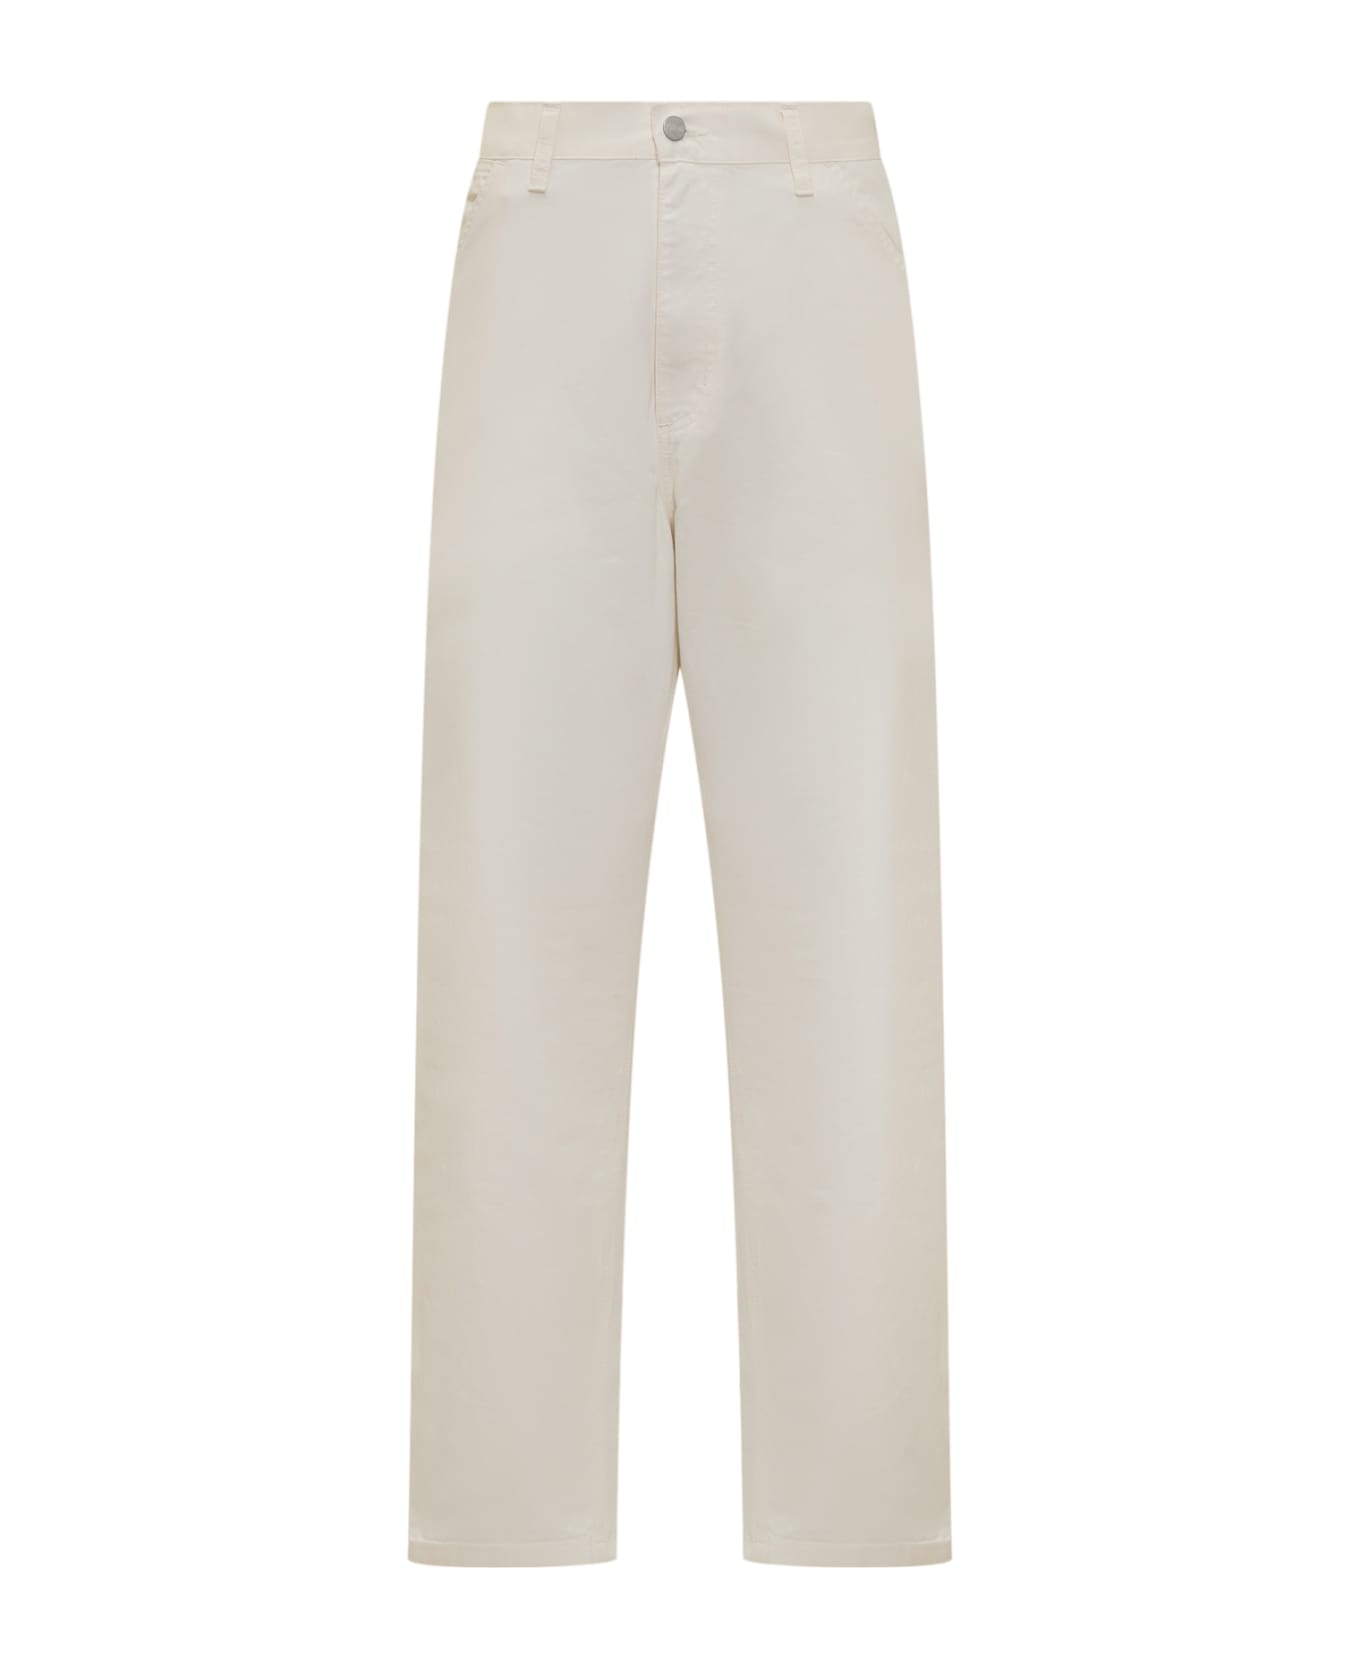 Carhartt Trousers - Off White